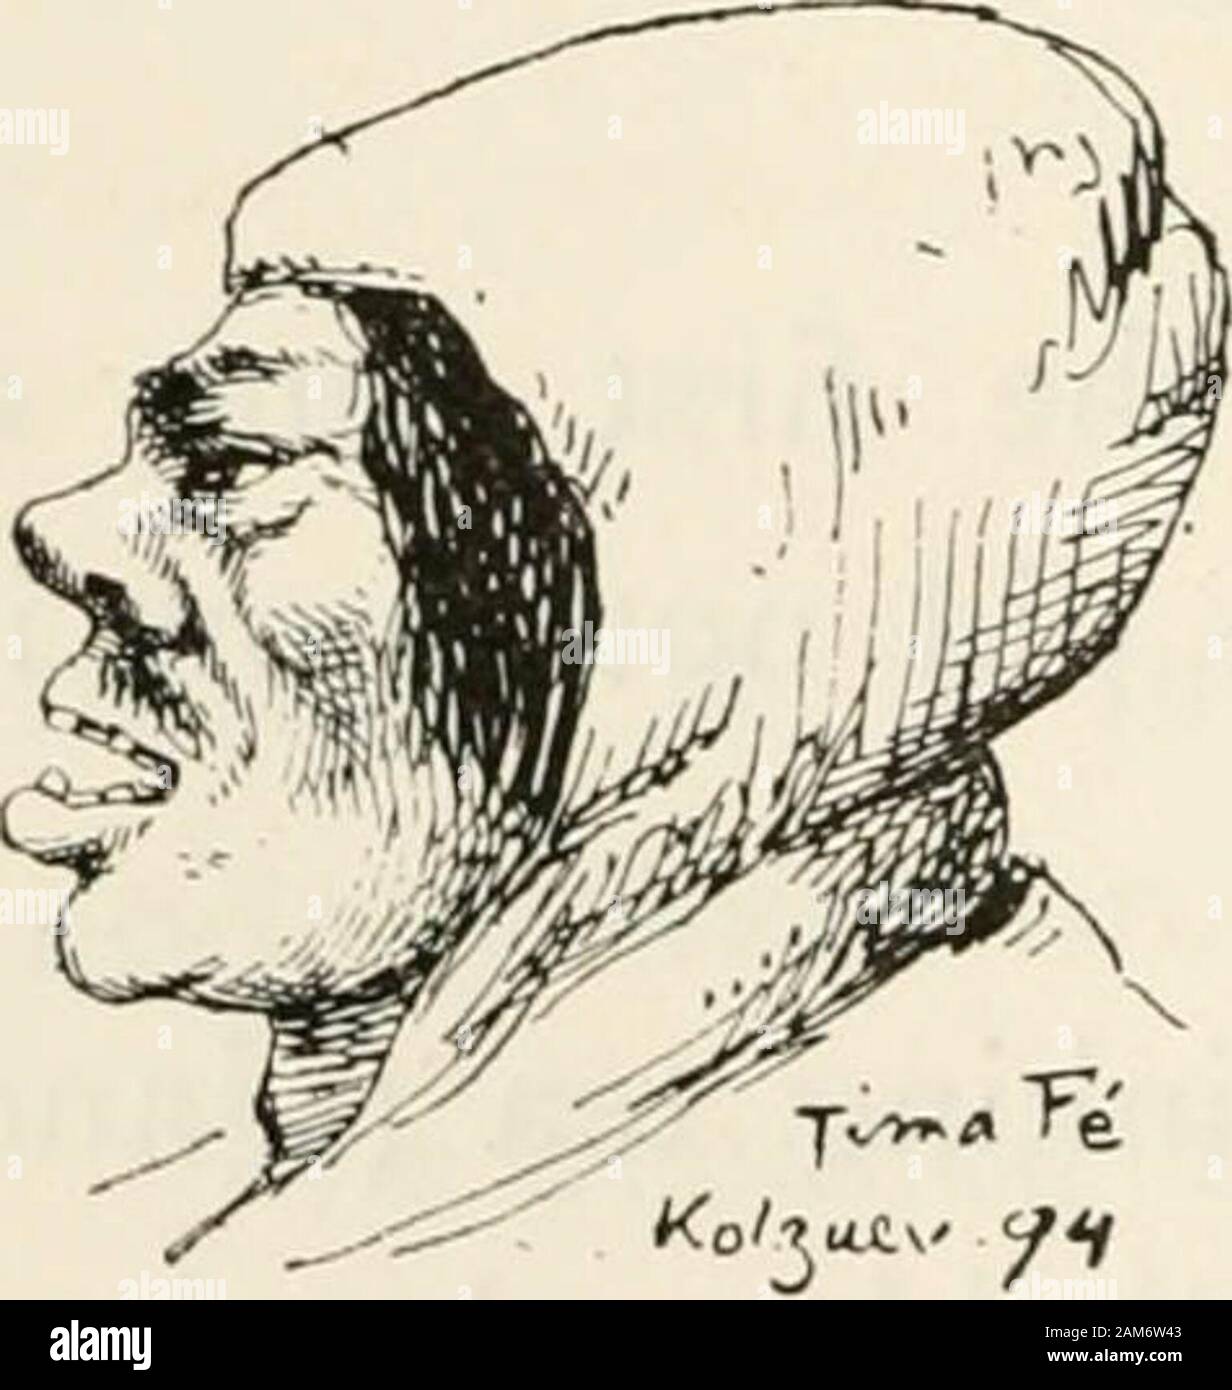 Ice-bound on Kolguev : a chapter in the exploration of Arctic Europe to which is added a record of the natural history of the island . neath whichappeared long locks of straight black hair. His mouth,enormous and wide open, was hedged by a bristling-row of ape-like teeth, and altogether there was some-thing so ogreish and strange about this apparition thatI stared speechless, at which they roared with laughter,and then arose a shout, Tima Fe! Tima Fe! Itwas Tima Fe, a Samoyed from the other boat. Hegrinned at his reception, and when he grinned he reallyseemed to lose himself behind his mouth. Stock Photo